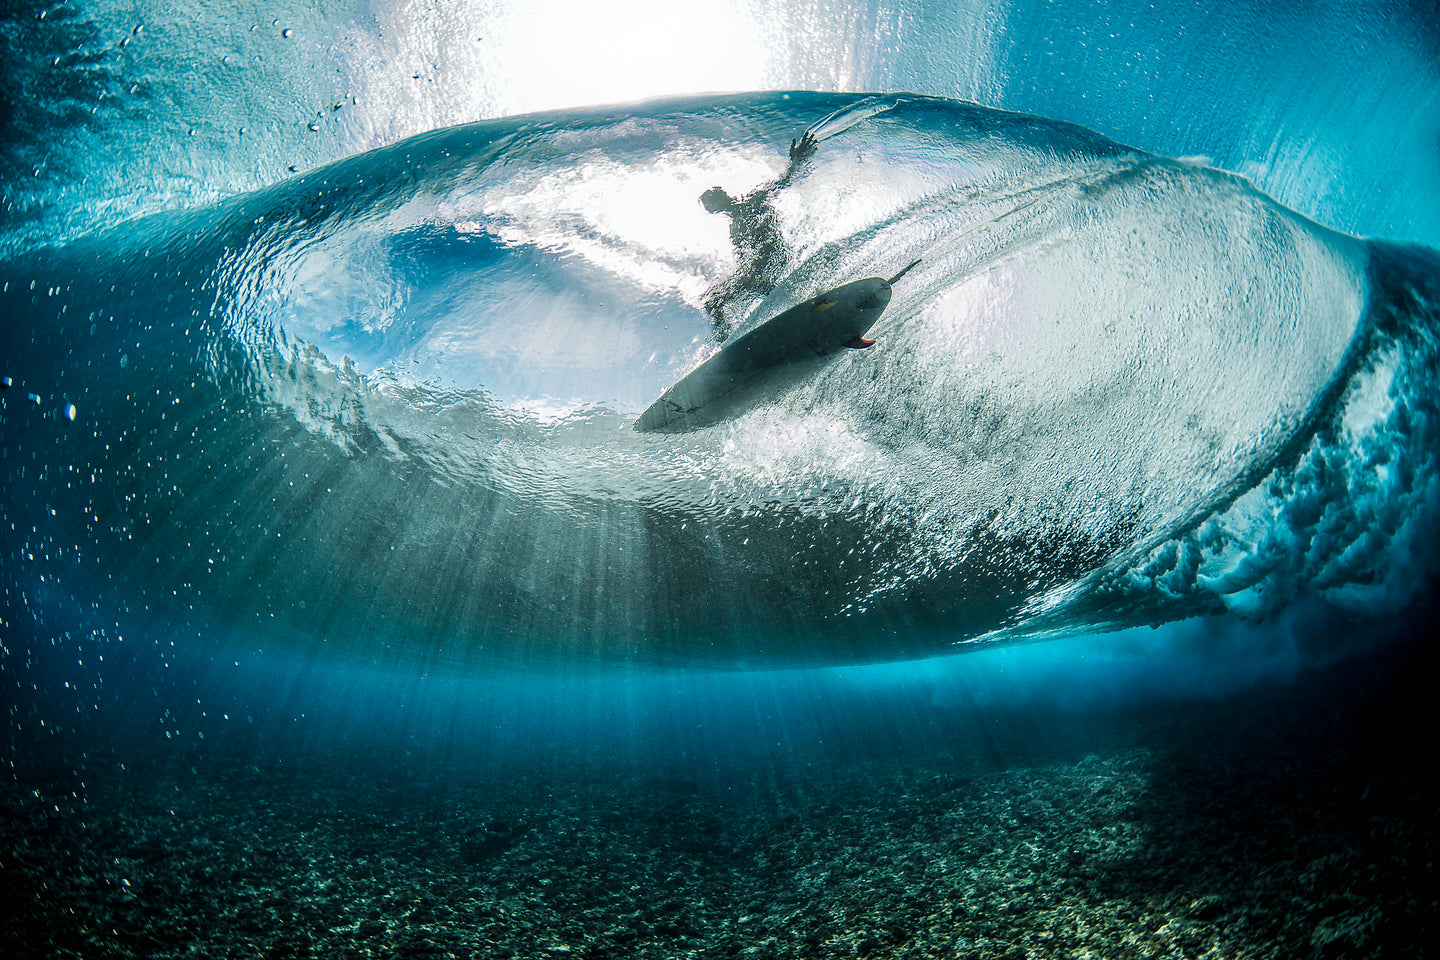 Picture of a surfer standing on a surfboard, taken from below.  Main photo on how page of Crepic website at livecrepic.com.  Taken by Ben Thouard